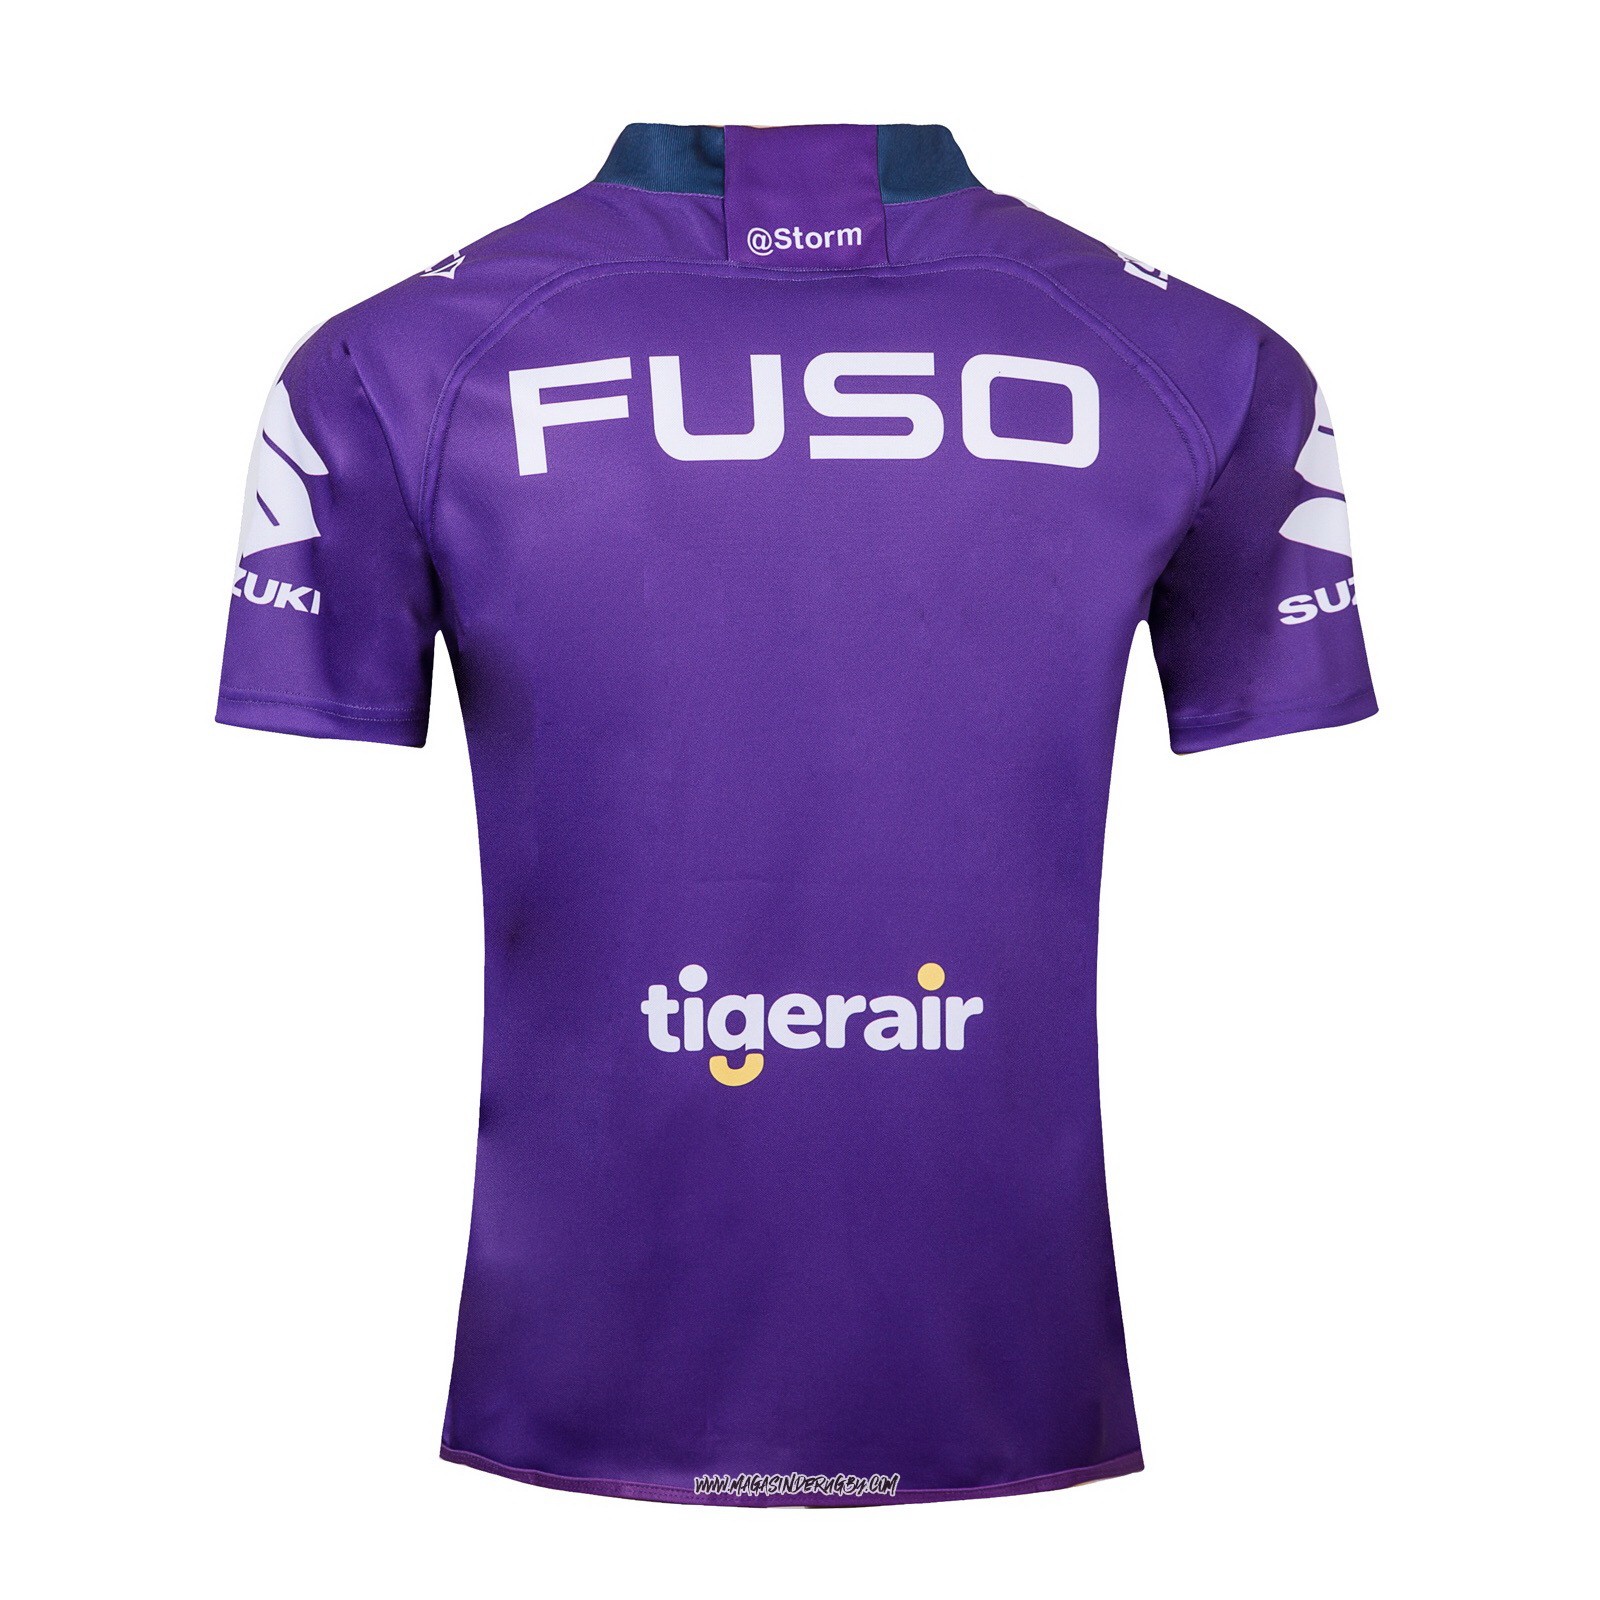 Maillot Melbourne Storm Rugby 2019 Commemorative